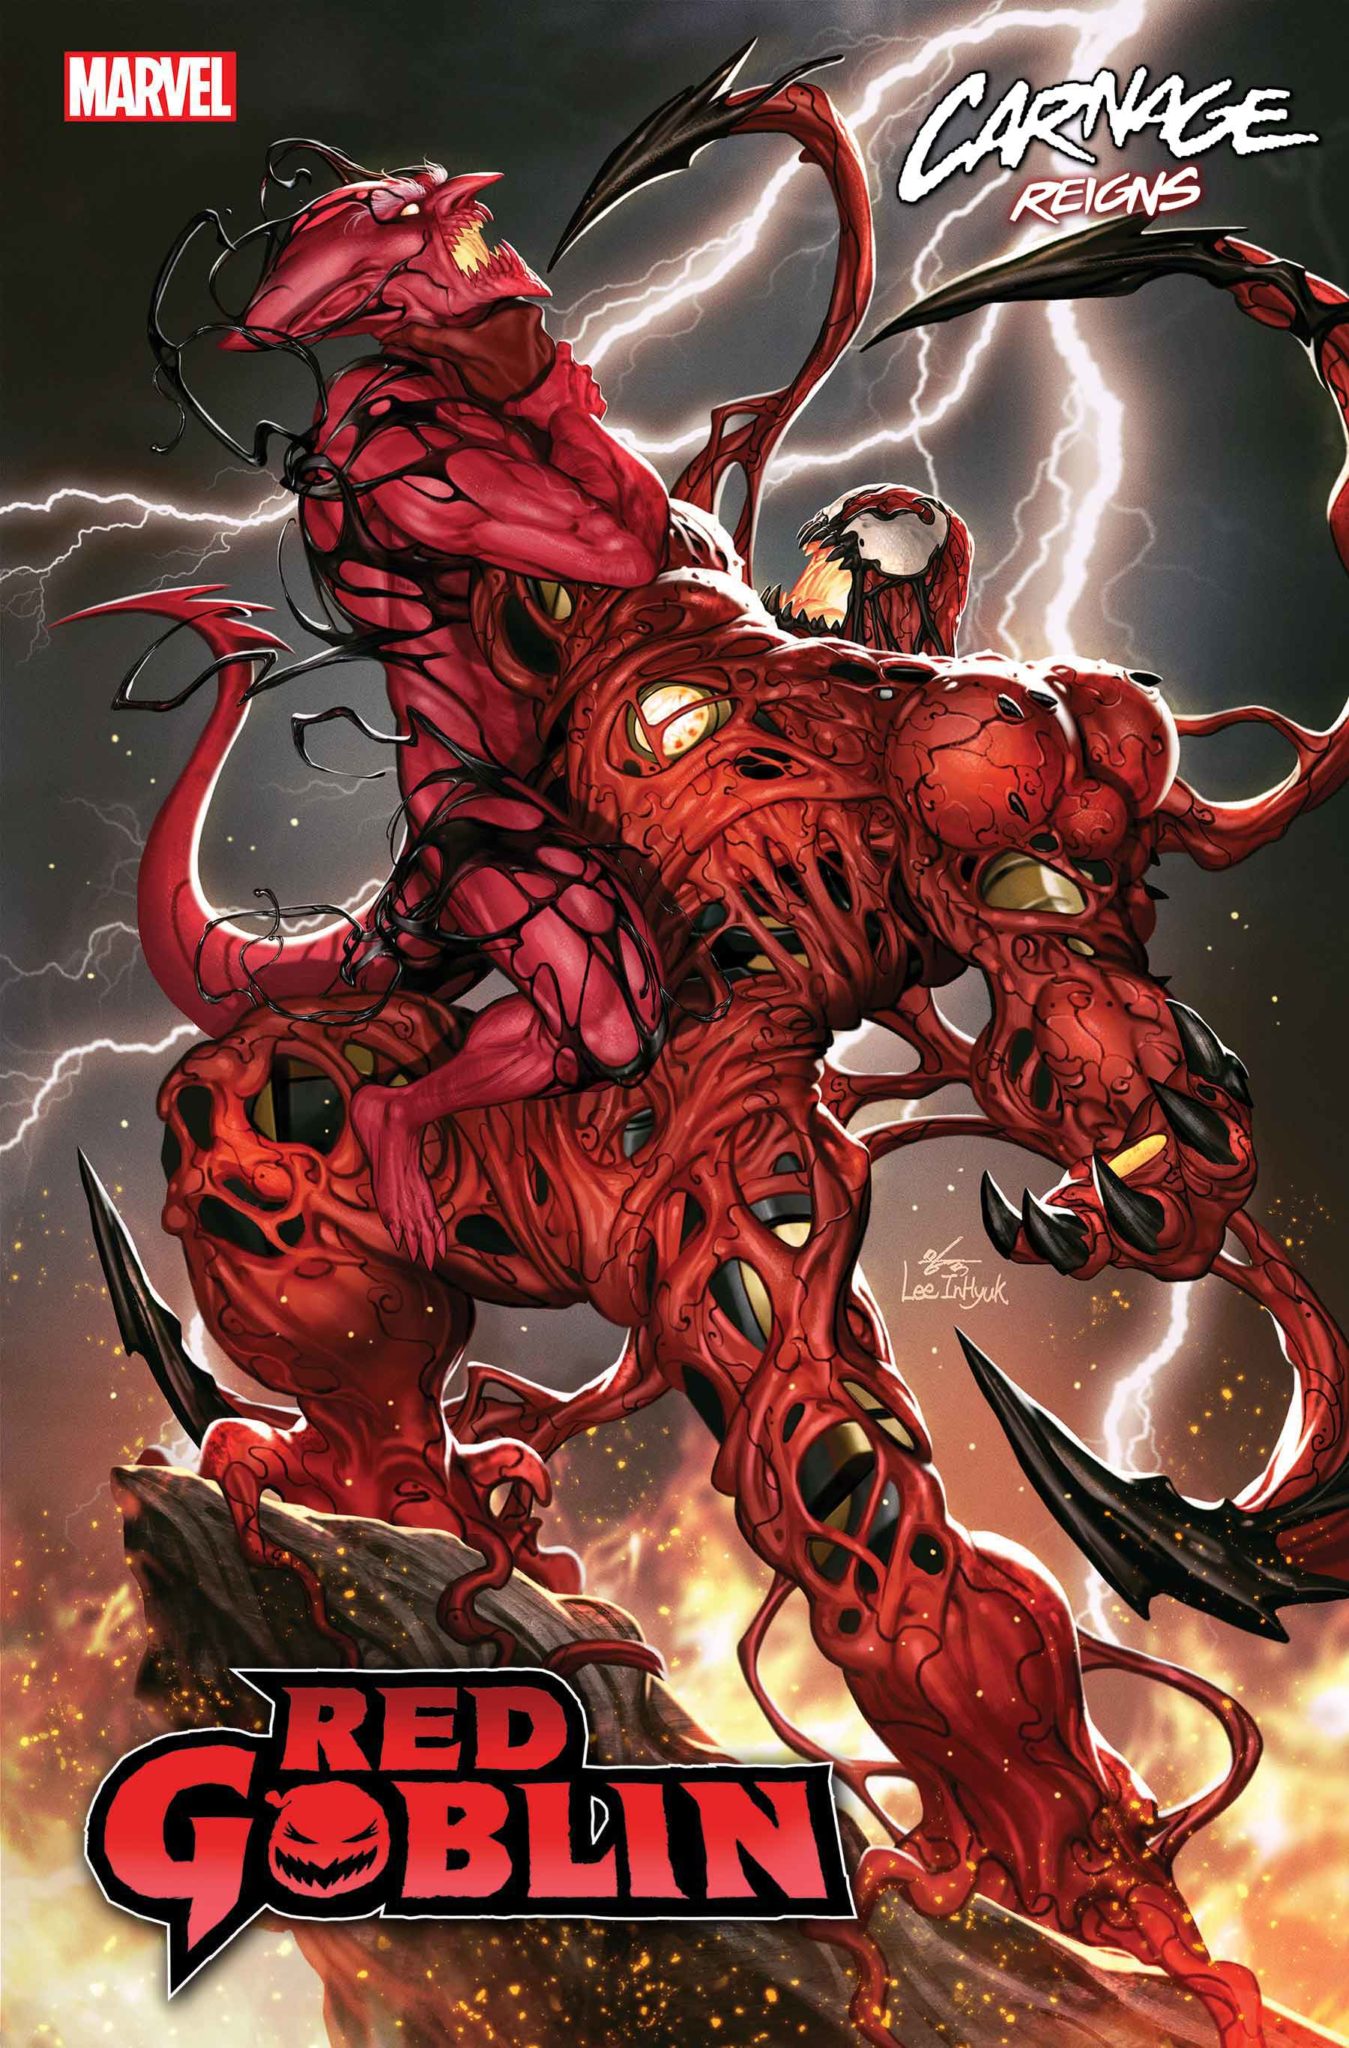 Carnage Reigns Red Goblin cover